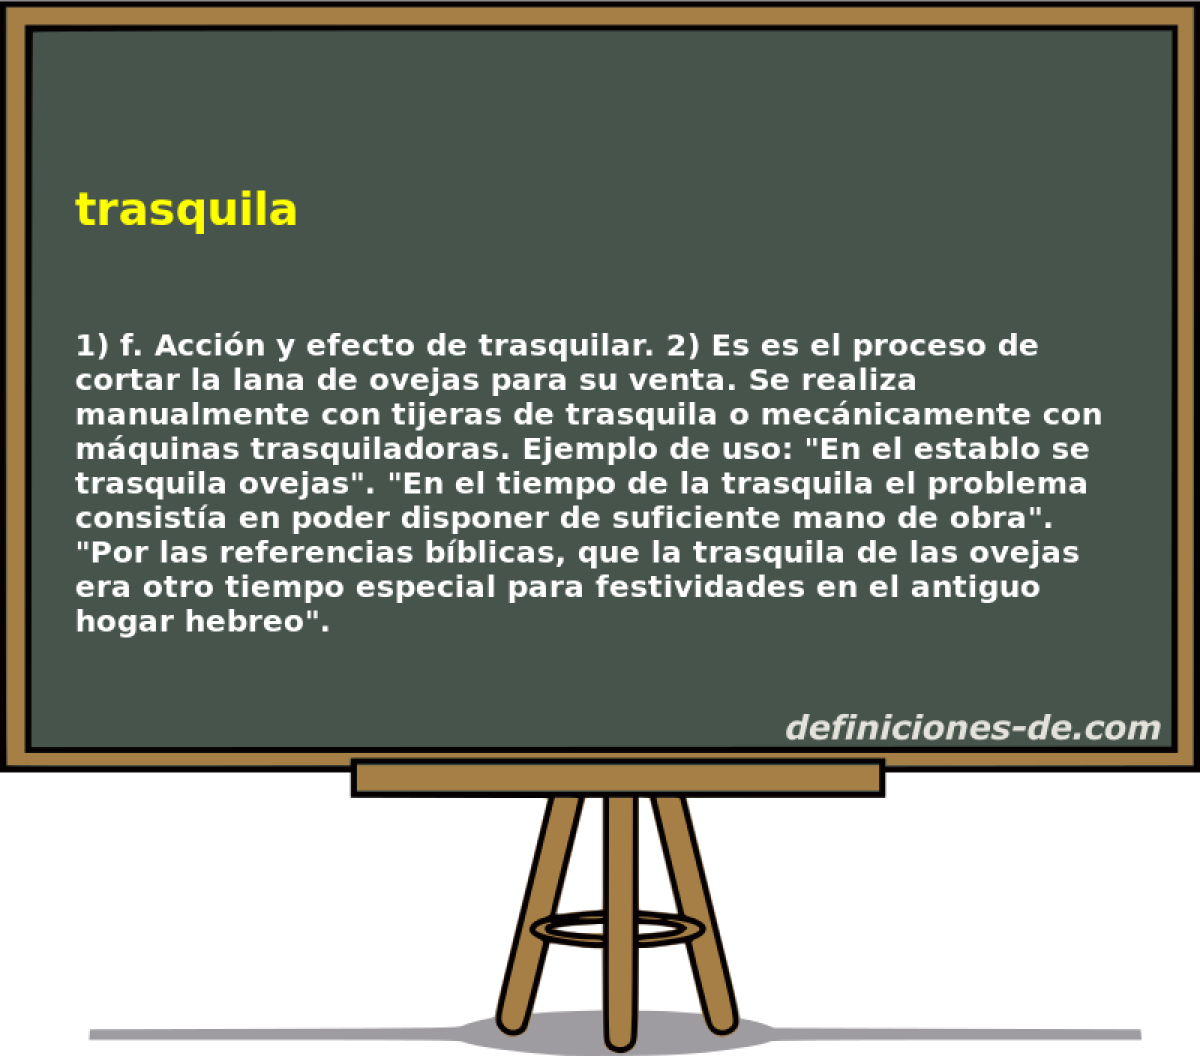 trasquila 